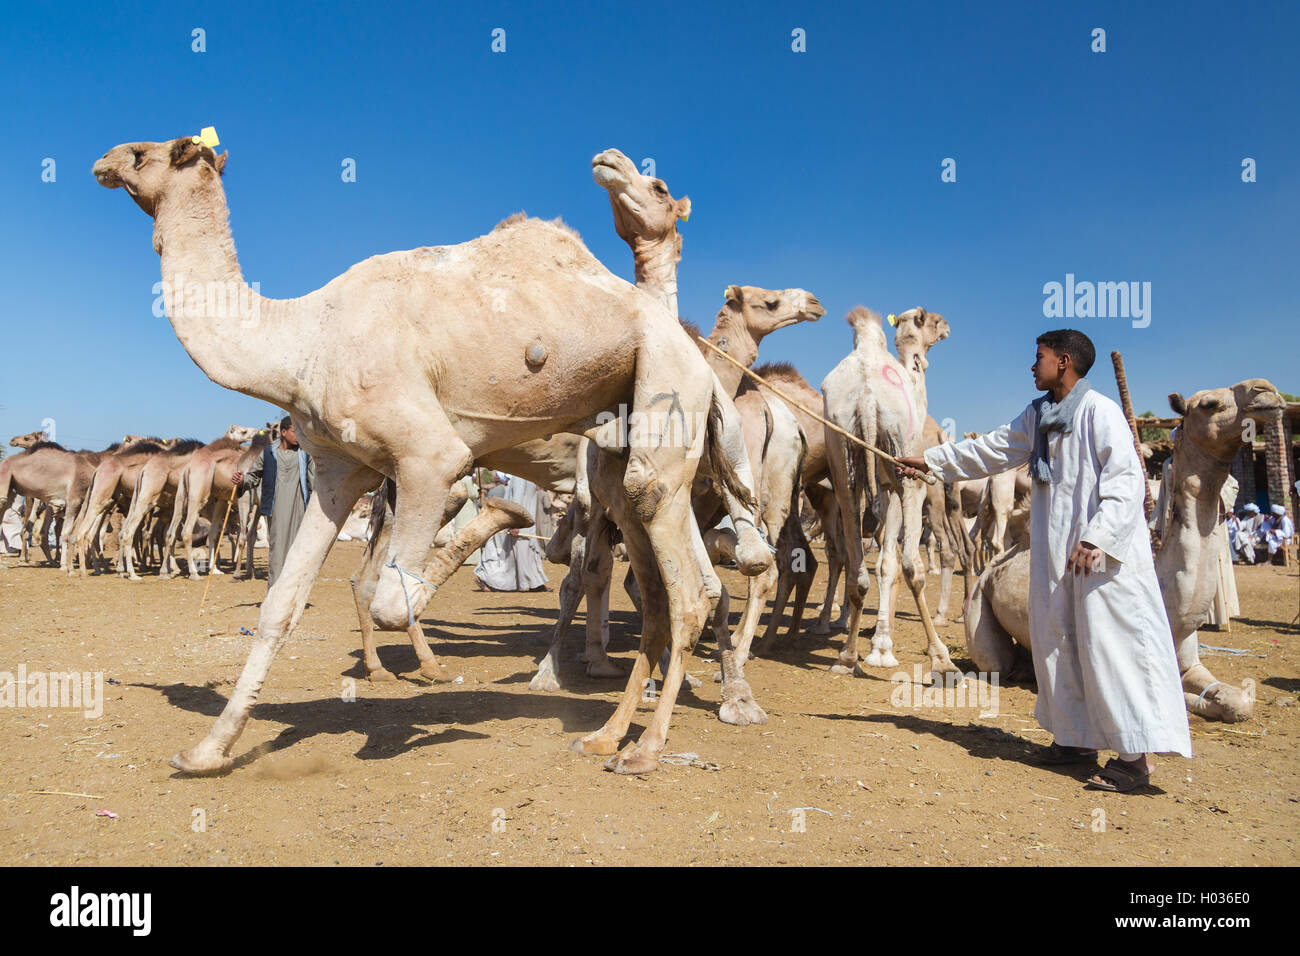 DARAW, EGYPT - FEBRUARY 6, 2016: Local young camel salesmen on Camel market using stick to control them. Stock Photo